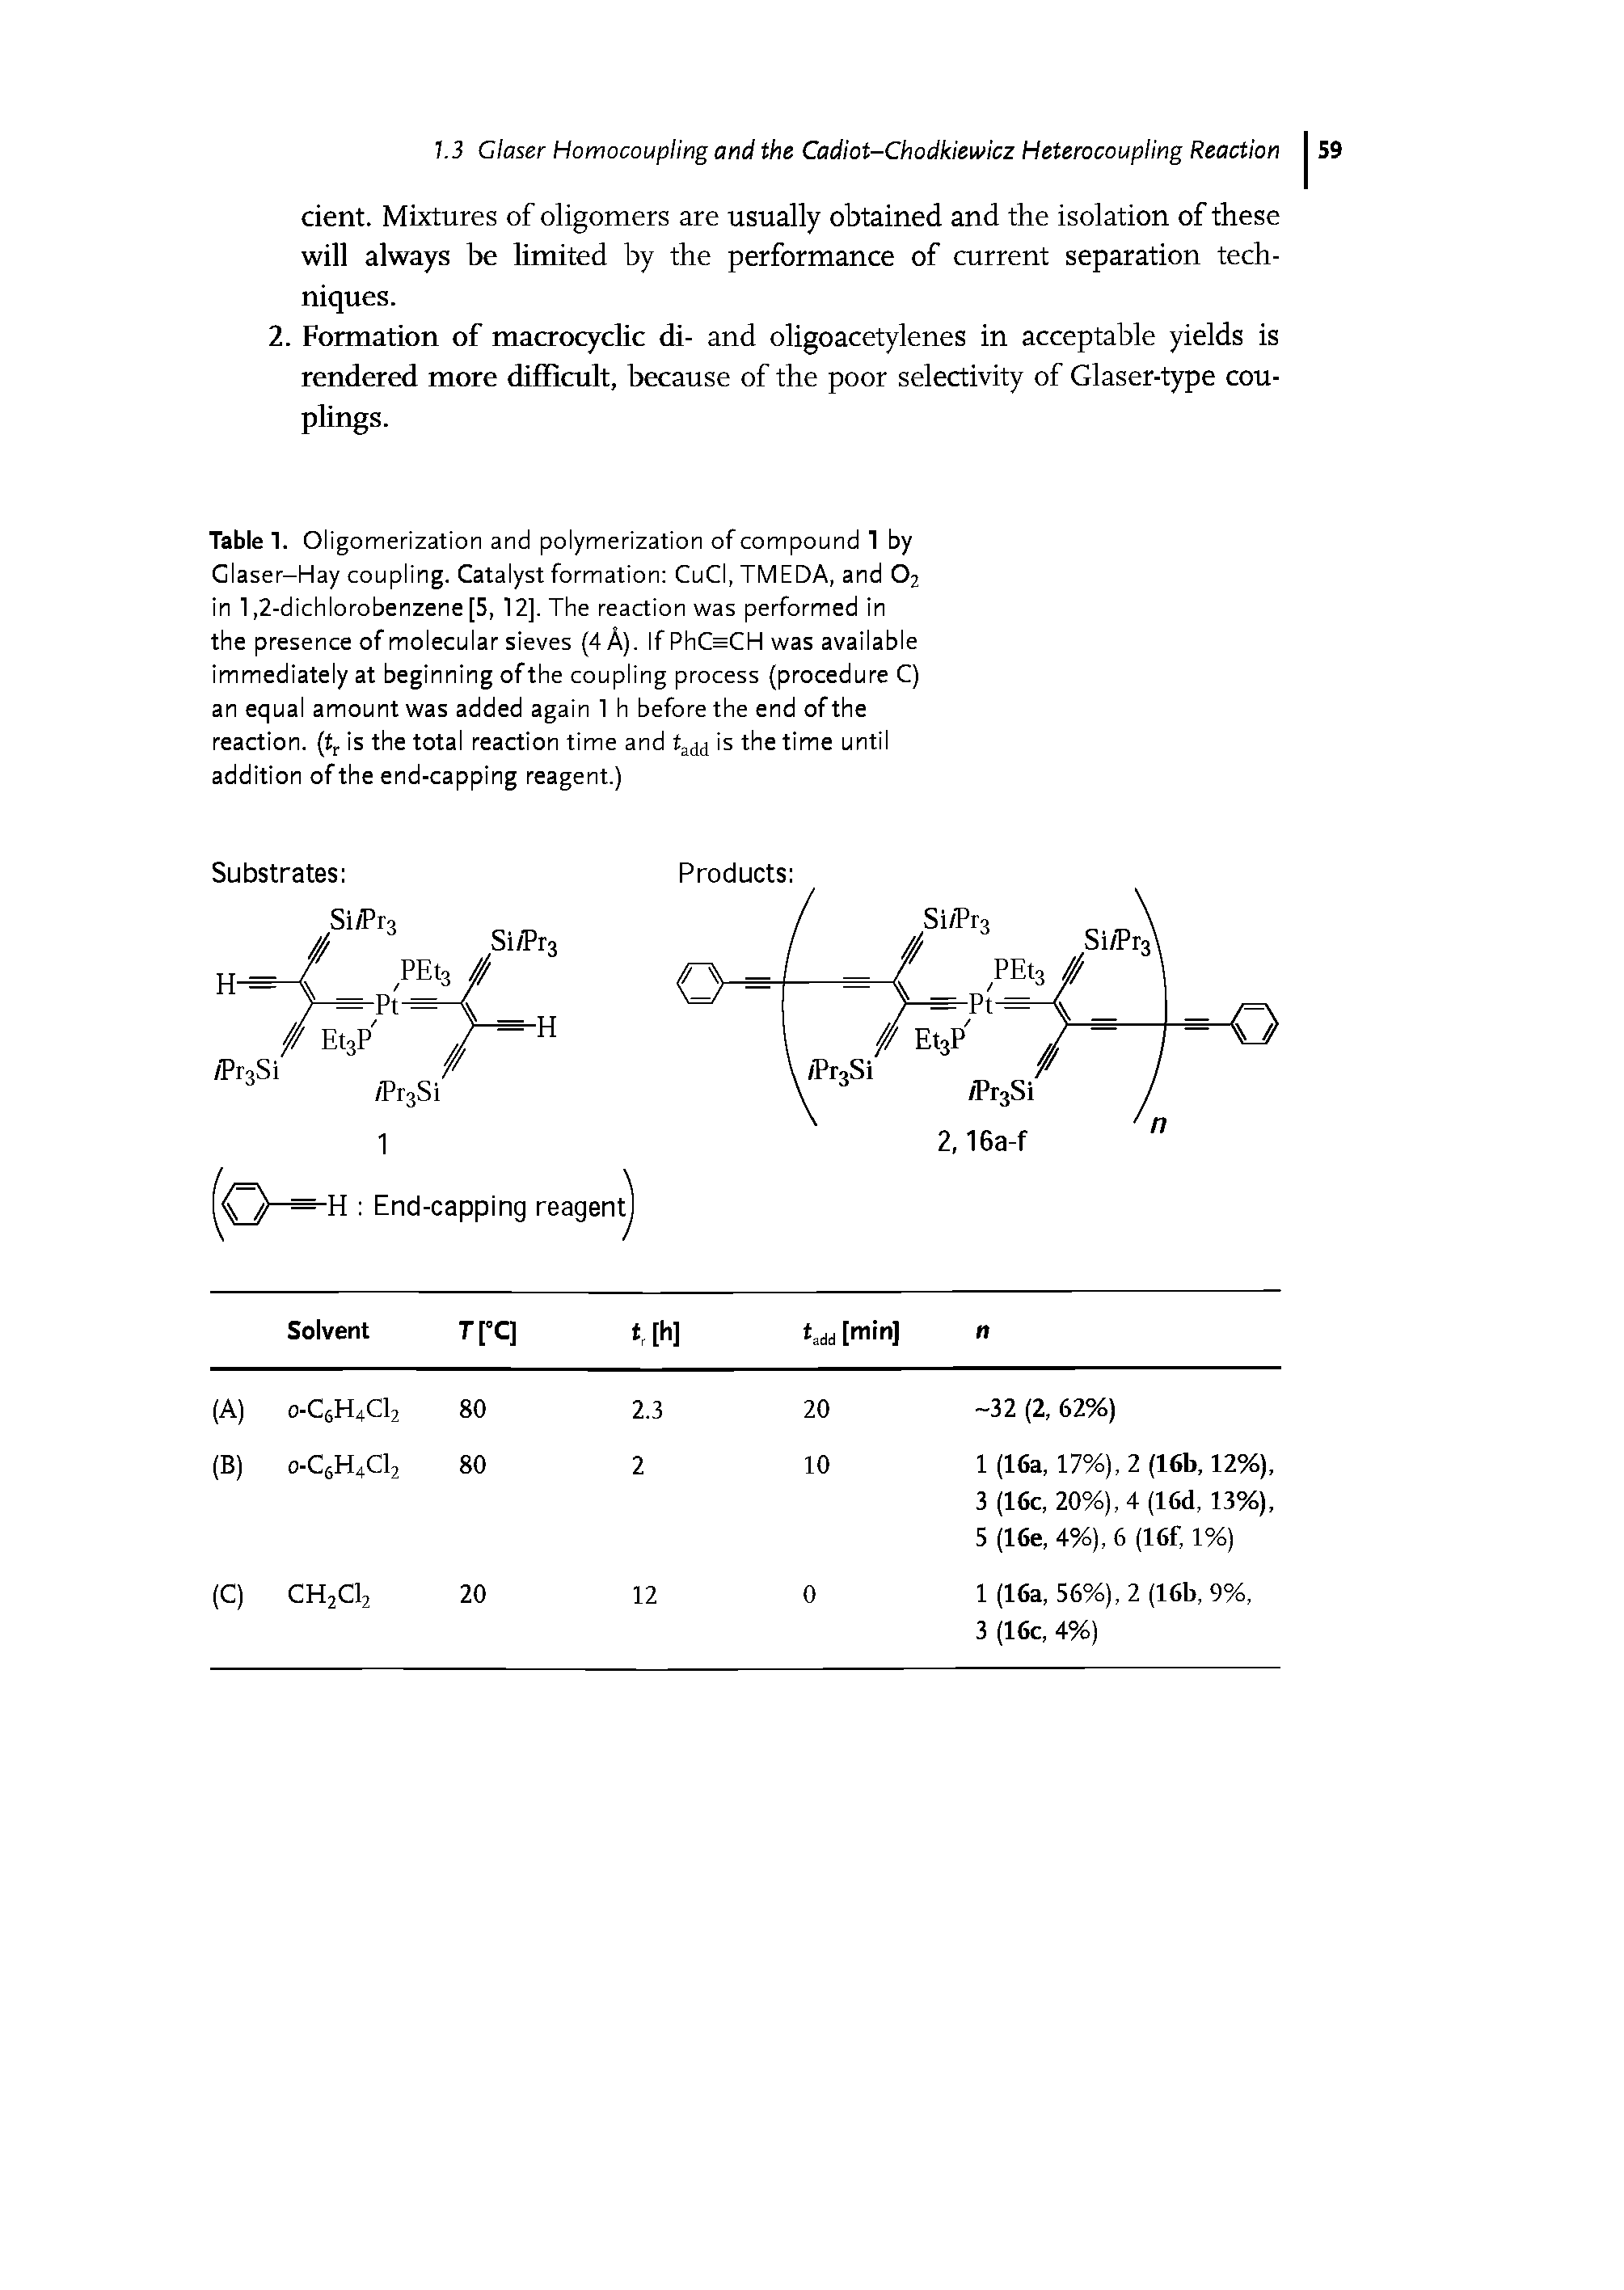 Table 1. Oligomerization and polymerization of compound 1 by Glaser-Hay coupling. Catalyst formation CuCI, TMEDA, and 02 in 1,2-dichlorobenzene [5, 12]. The reaction was performed in the presence of molecular sieves (4 A). If PhC=CH was available immediately at beginning ofthe coupling process (procedure C) an equal amount was added again 1 h before the end of the reaction. (tr is the total reaction time and tadd is the time until addition of the end-capping reagent.)...